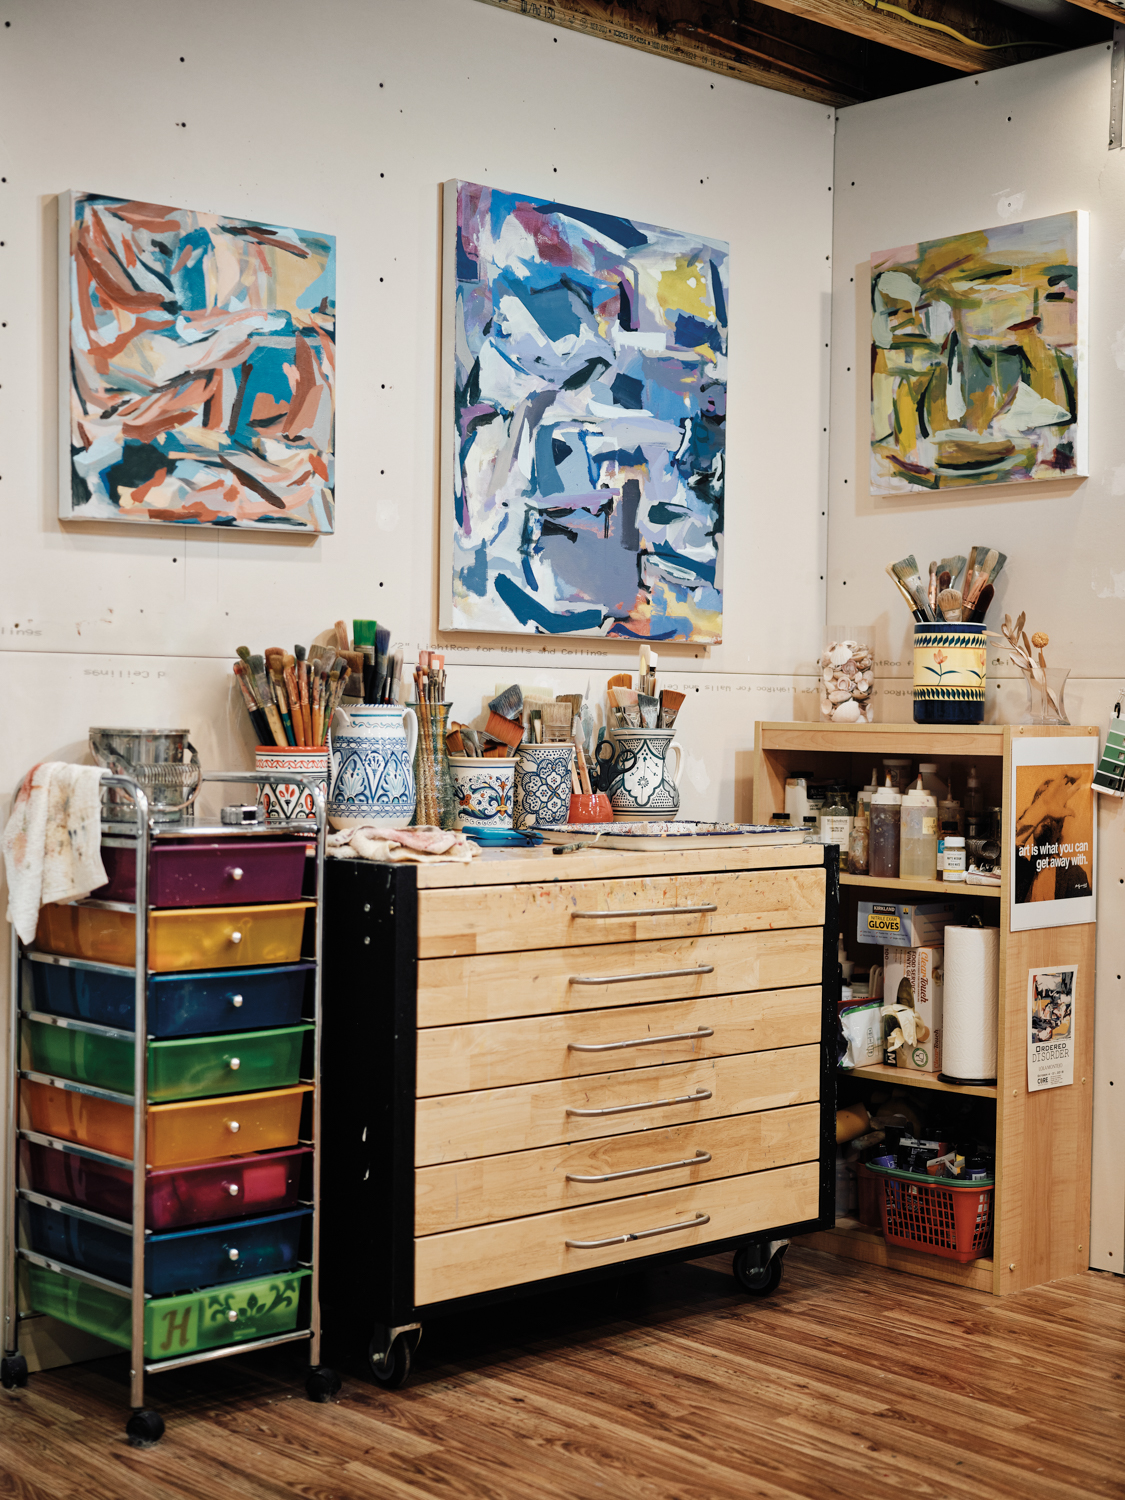 storage cabinets and shelves filled with painting supplies, with abstract paintings hung above